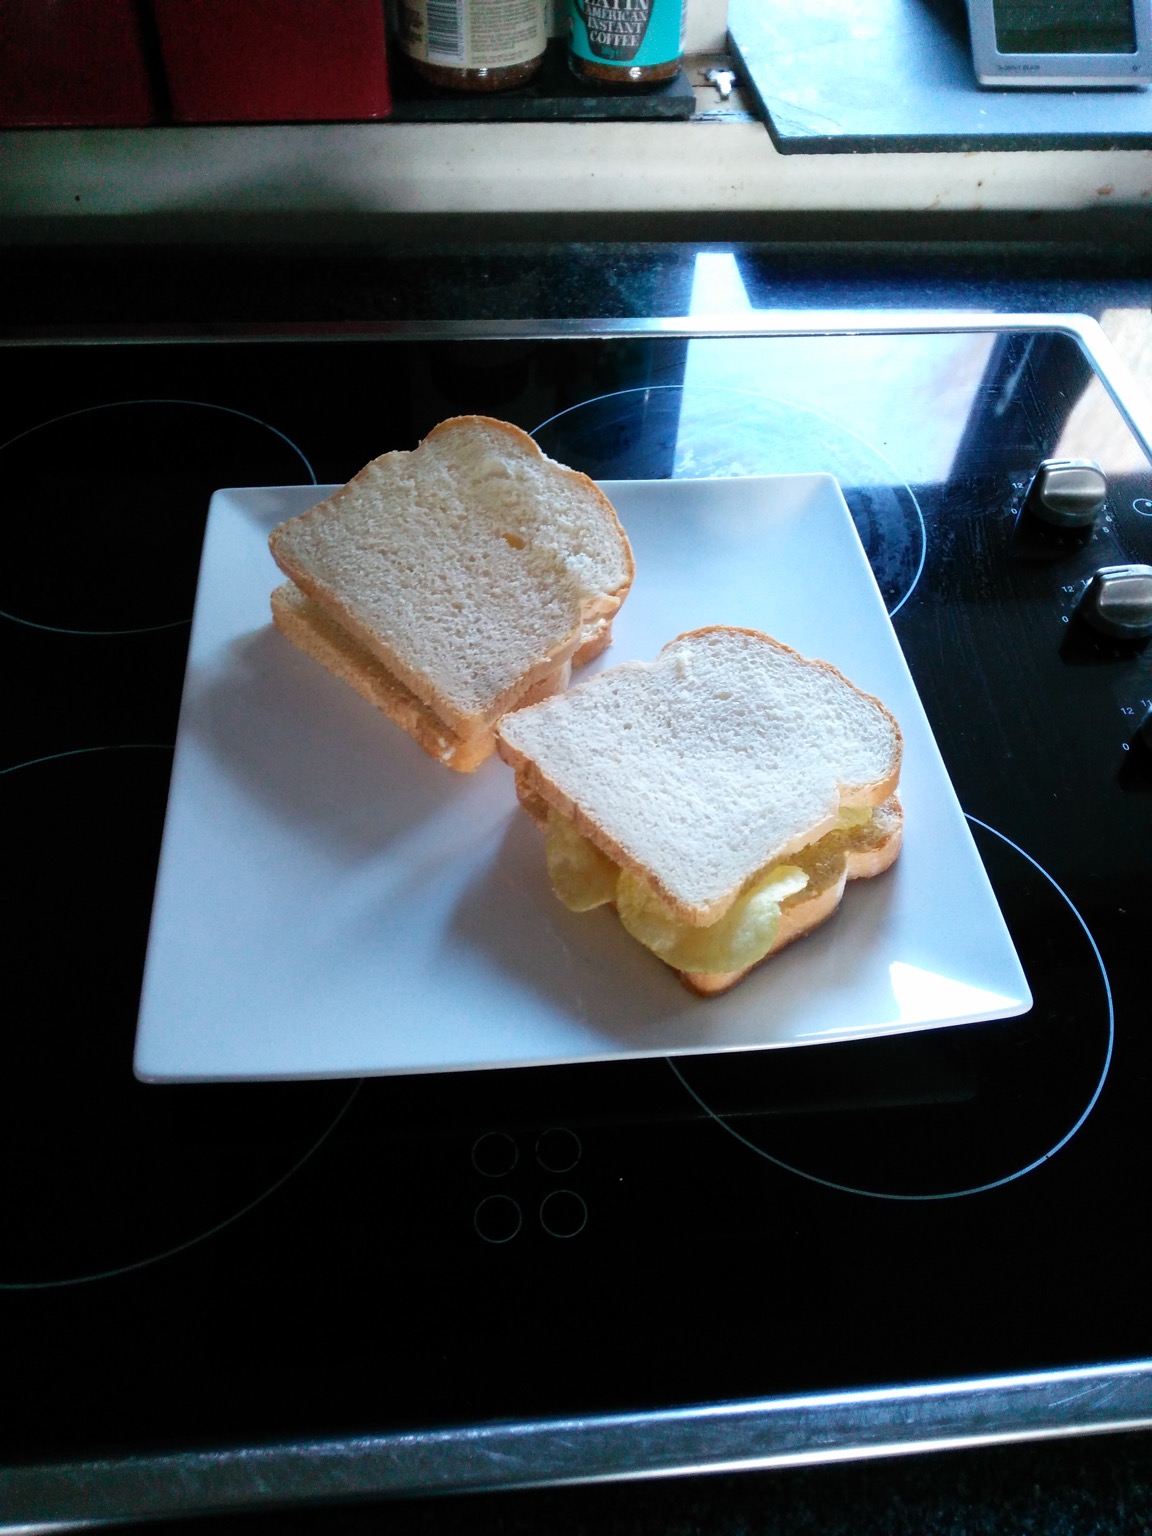 White crisp sandwich on a cooker times two